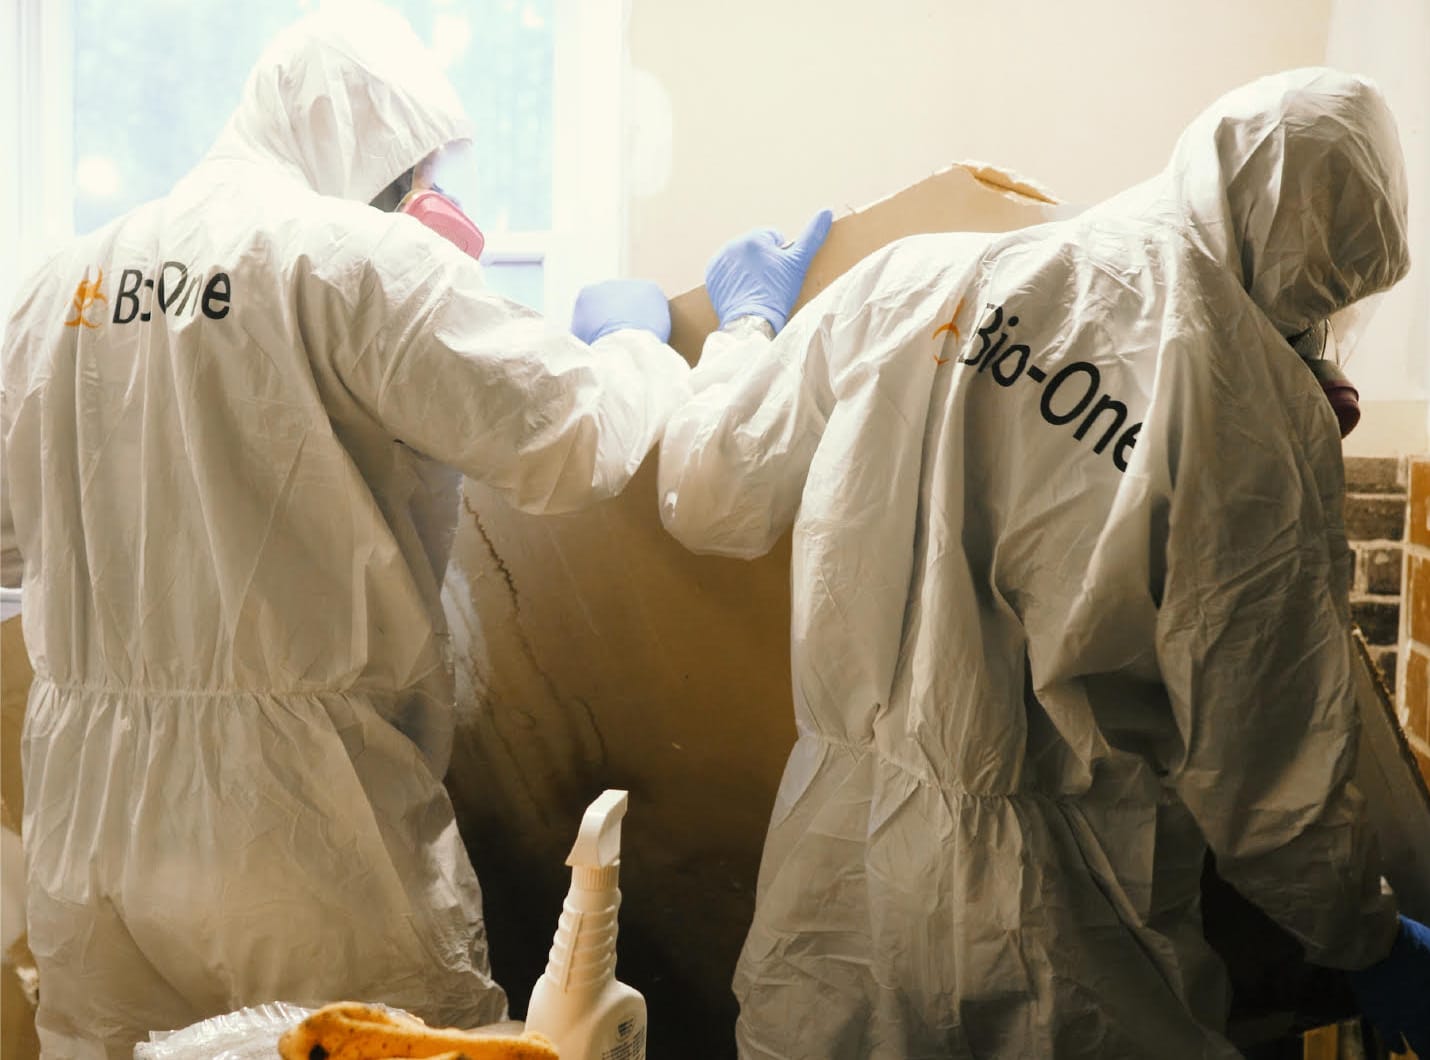 Death, Crime Scene, Biohazard & Hoarding Clean Up Services for Grays Harbor County